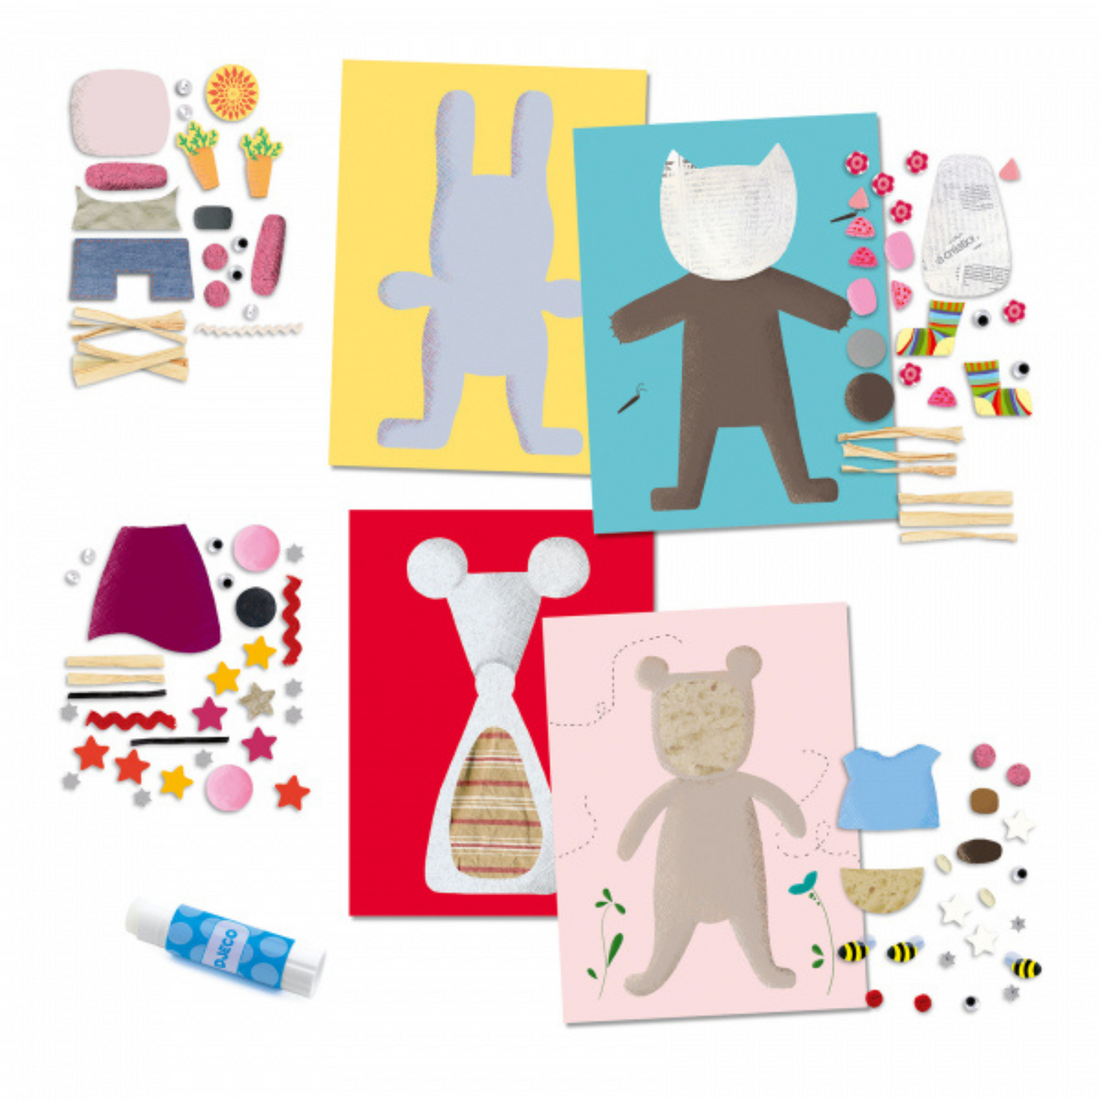 Creative set - Collages for the little ones - Animals